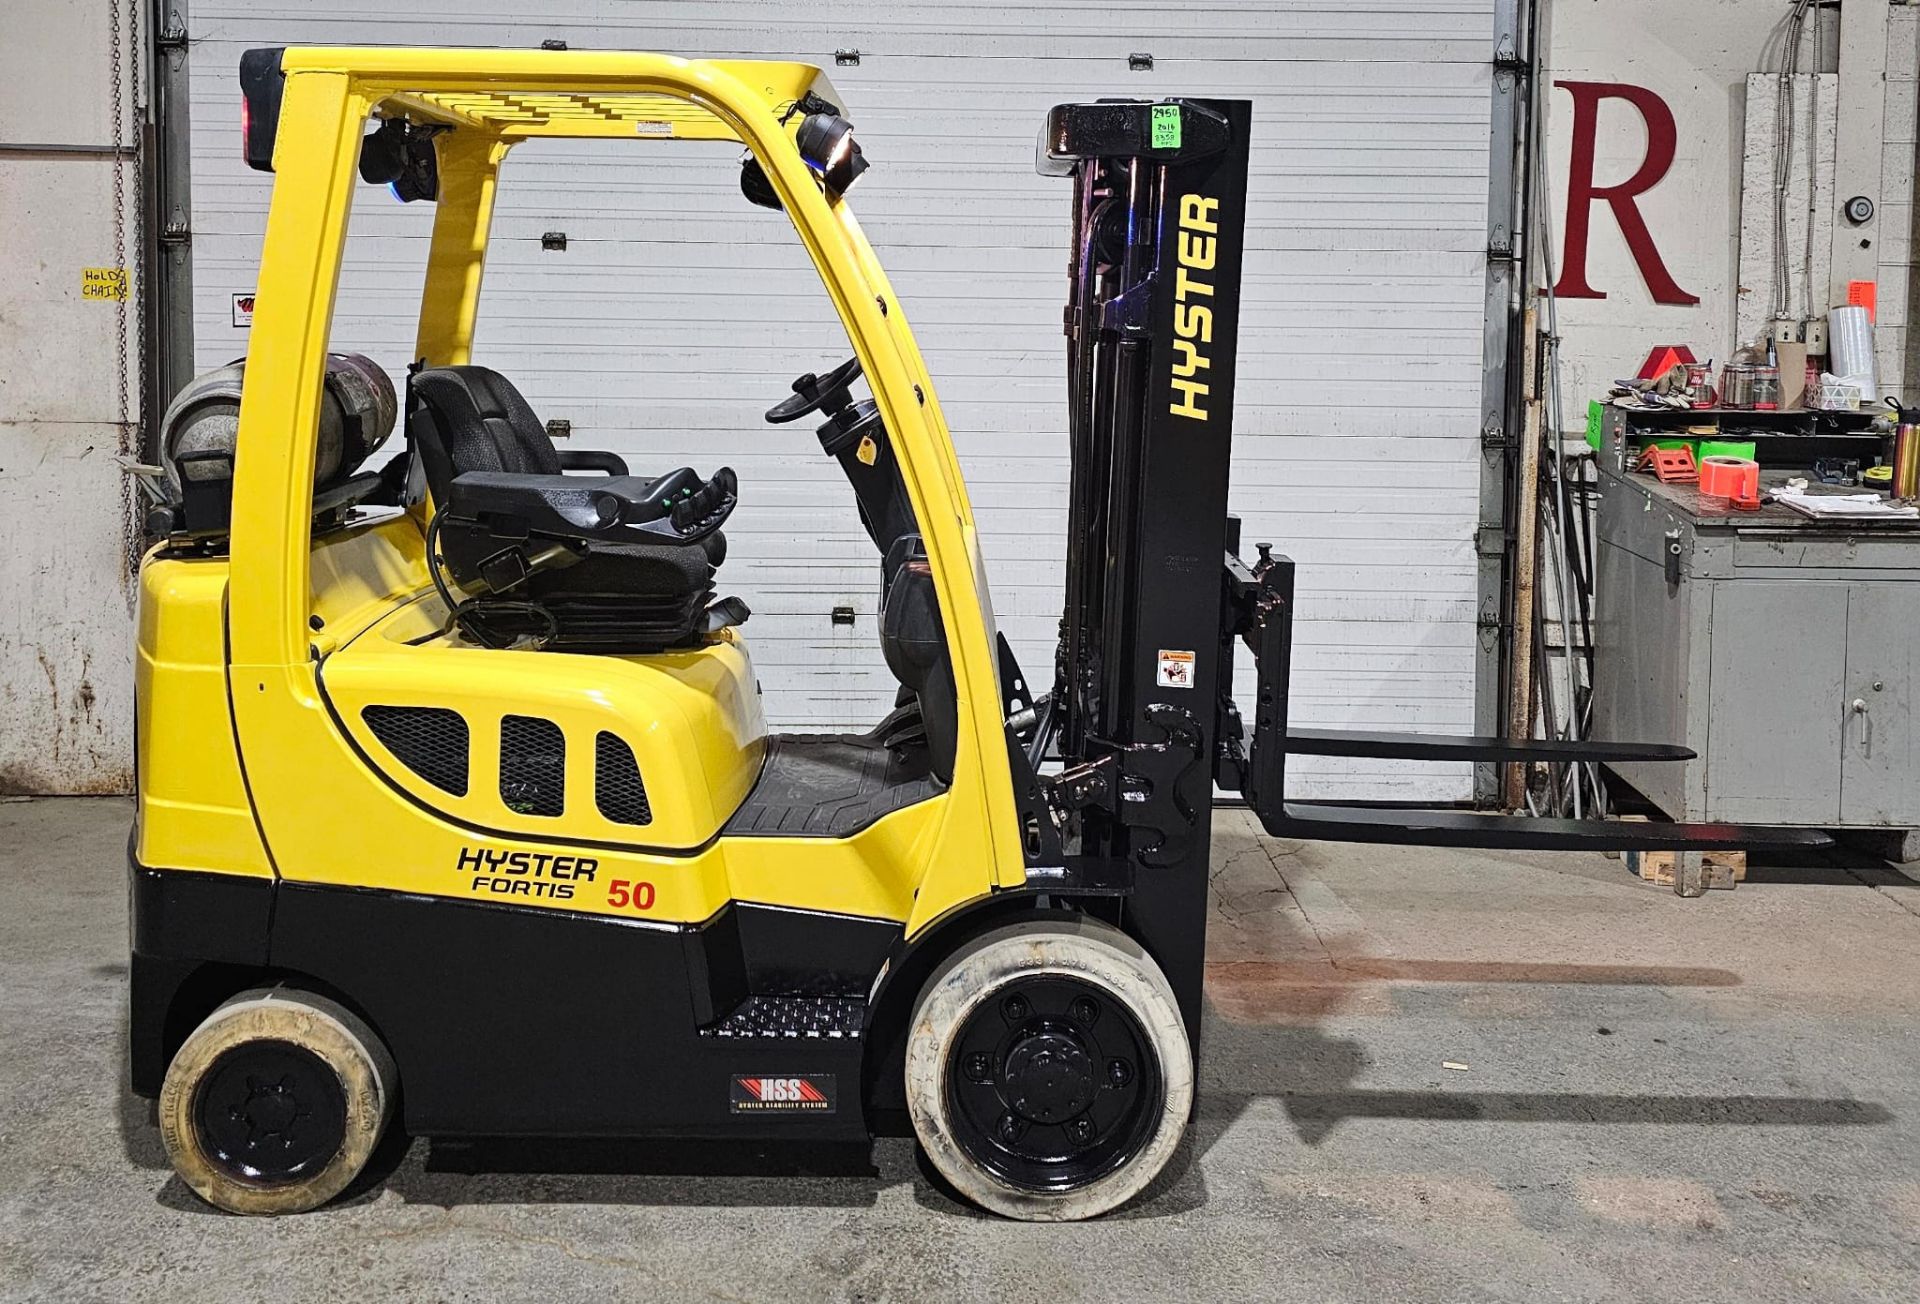 2016 HYSTER 5,000lbs Capacity LPG (Propane) Forklift with sideshift & 4 function & fittings & 3-